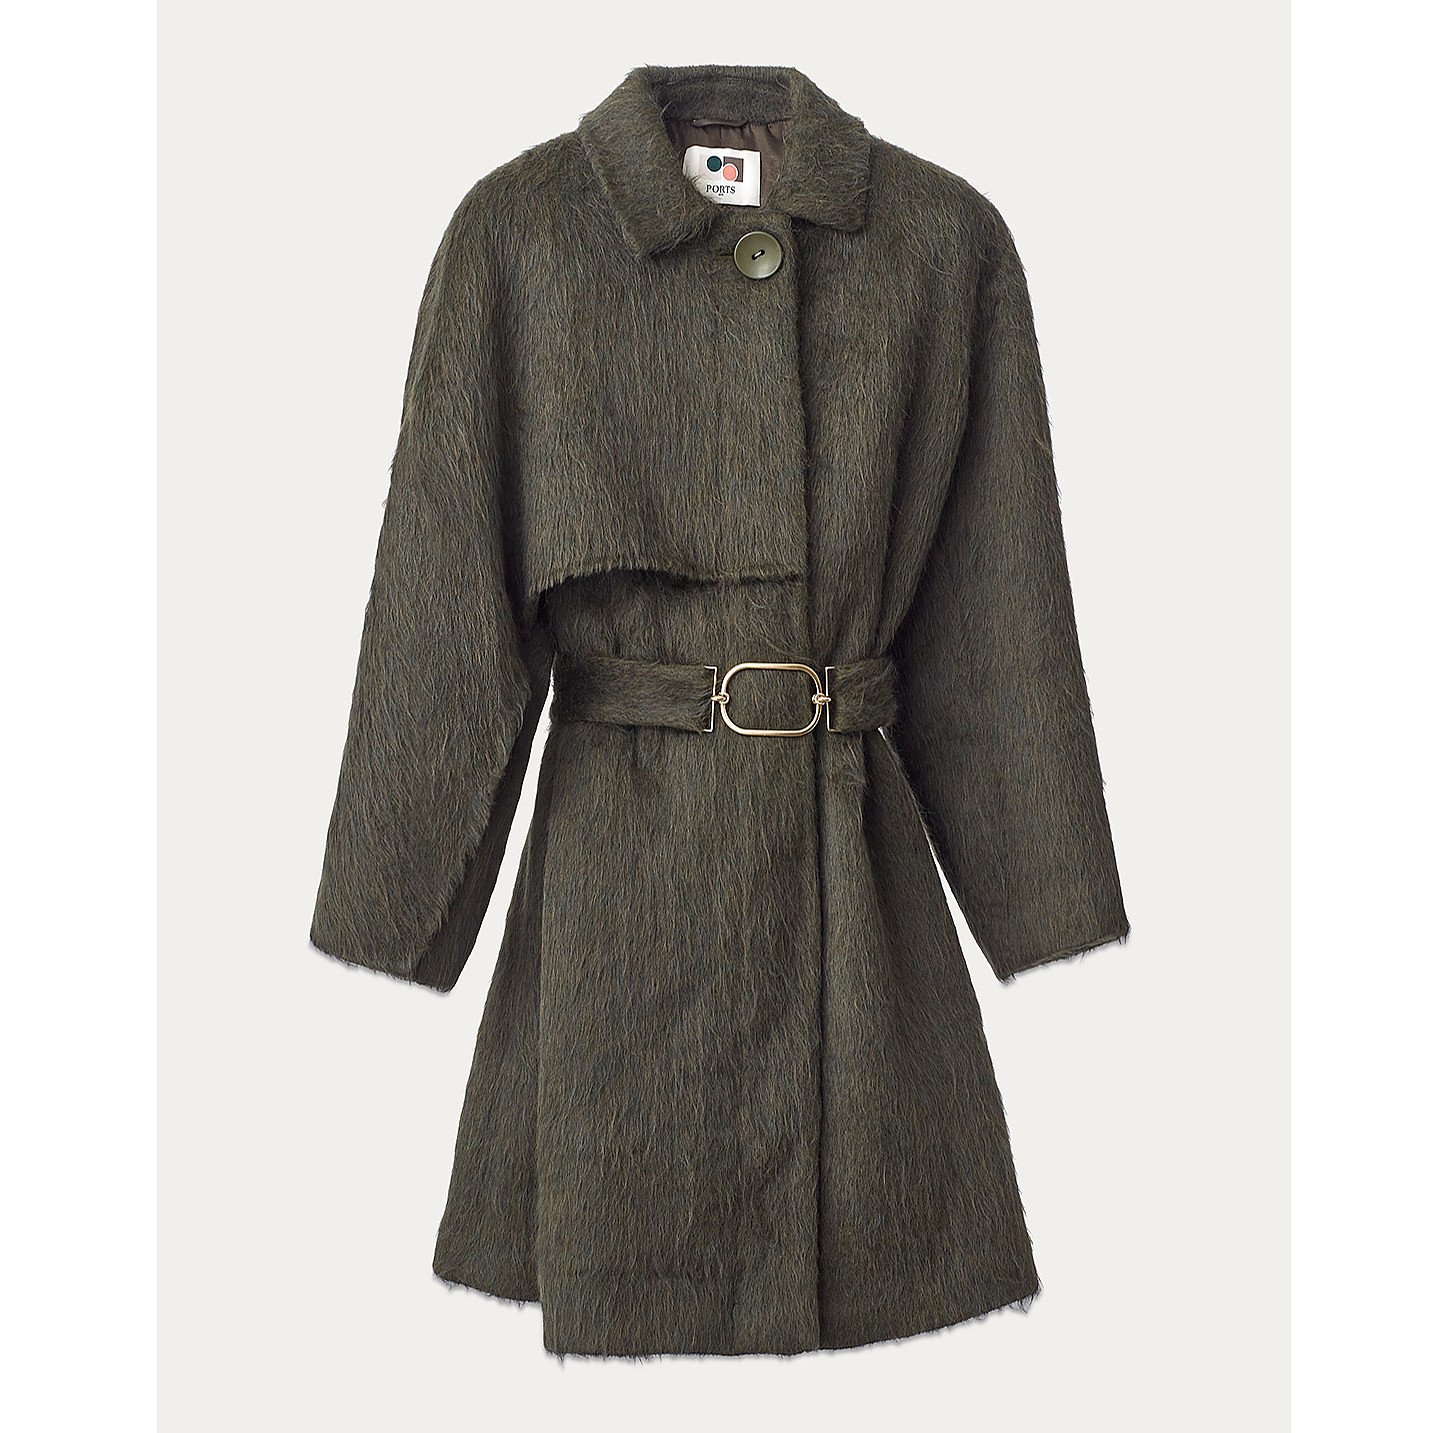 PORTS 1961 Wool Caped Trench Coat